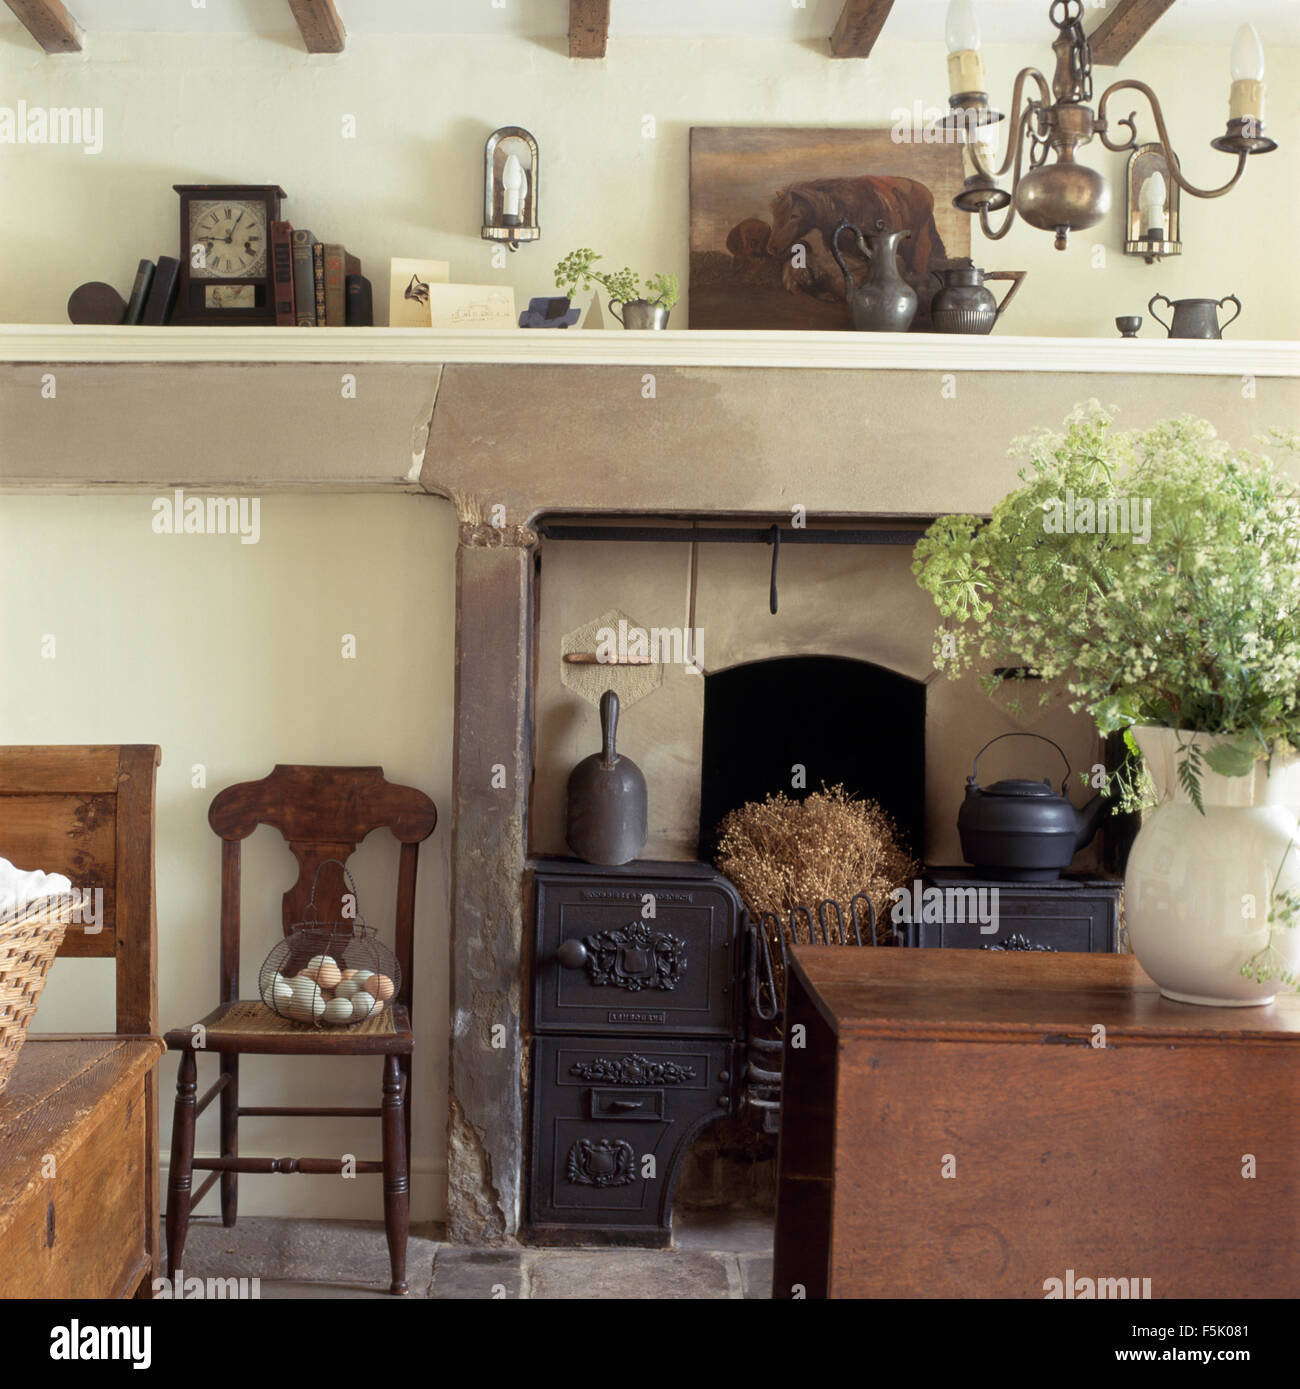 Antique wooden chair beside fireplace with an original cast iron range oven in fireplace in a cottage dining room Stock Photo